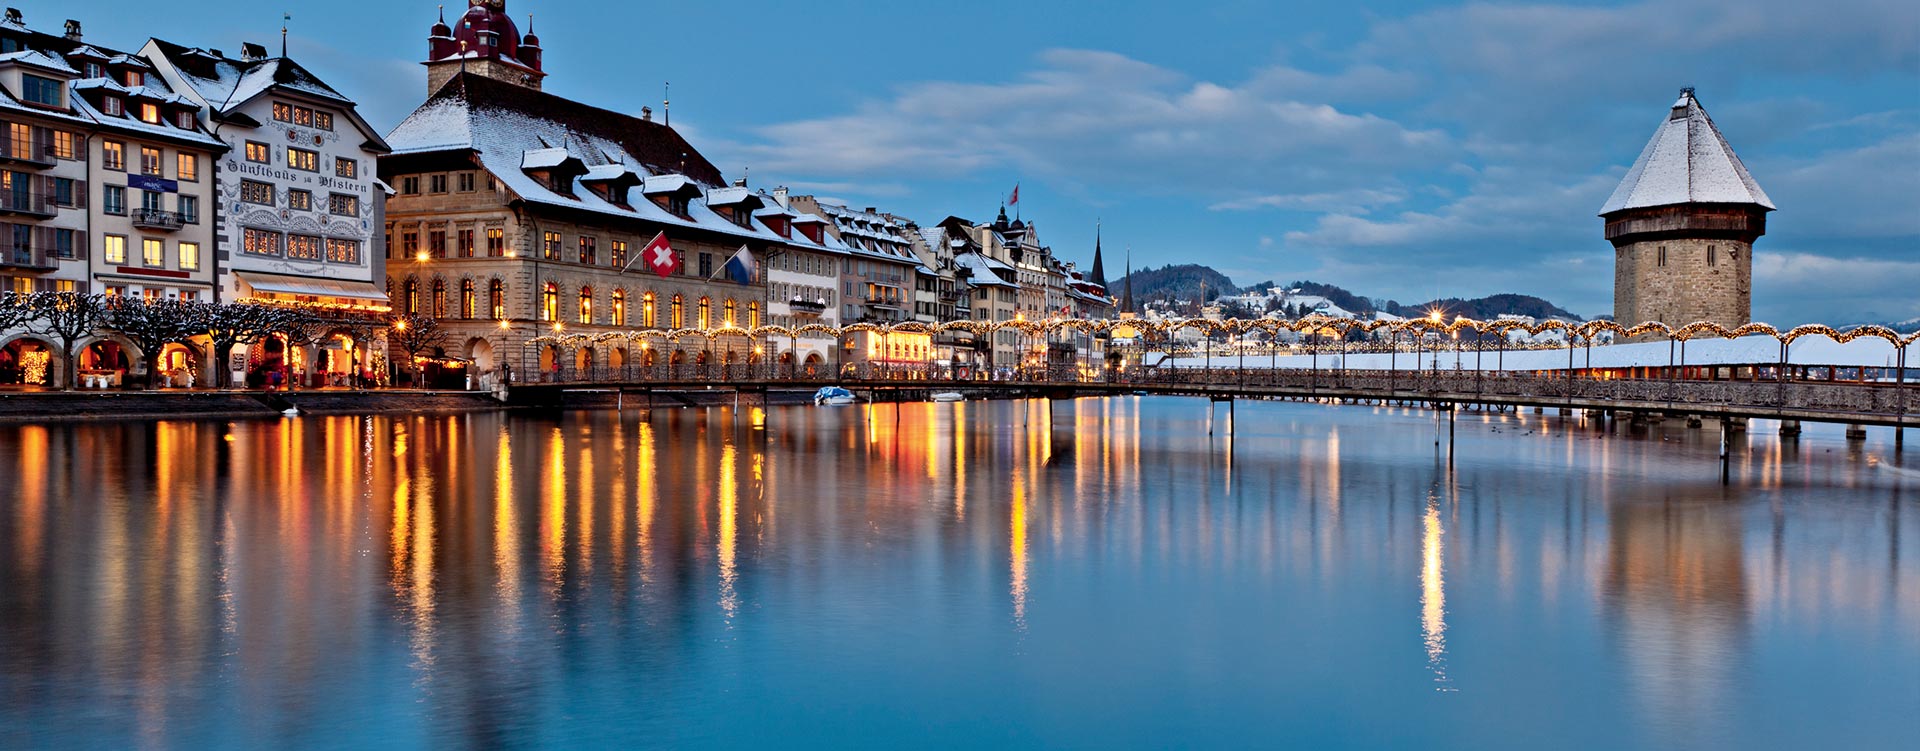 Deals on Business class tickets to Lucerne lead to expansive rail passes and fun day trips. - IFlyFirstClass